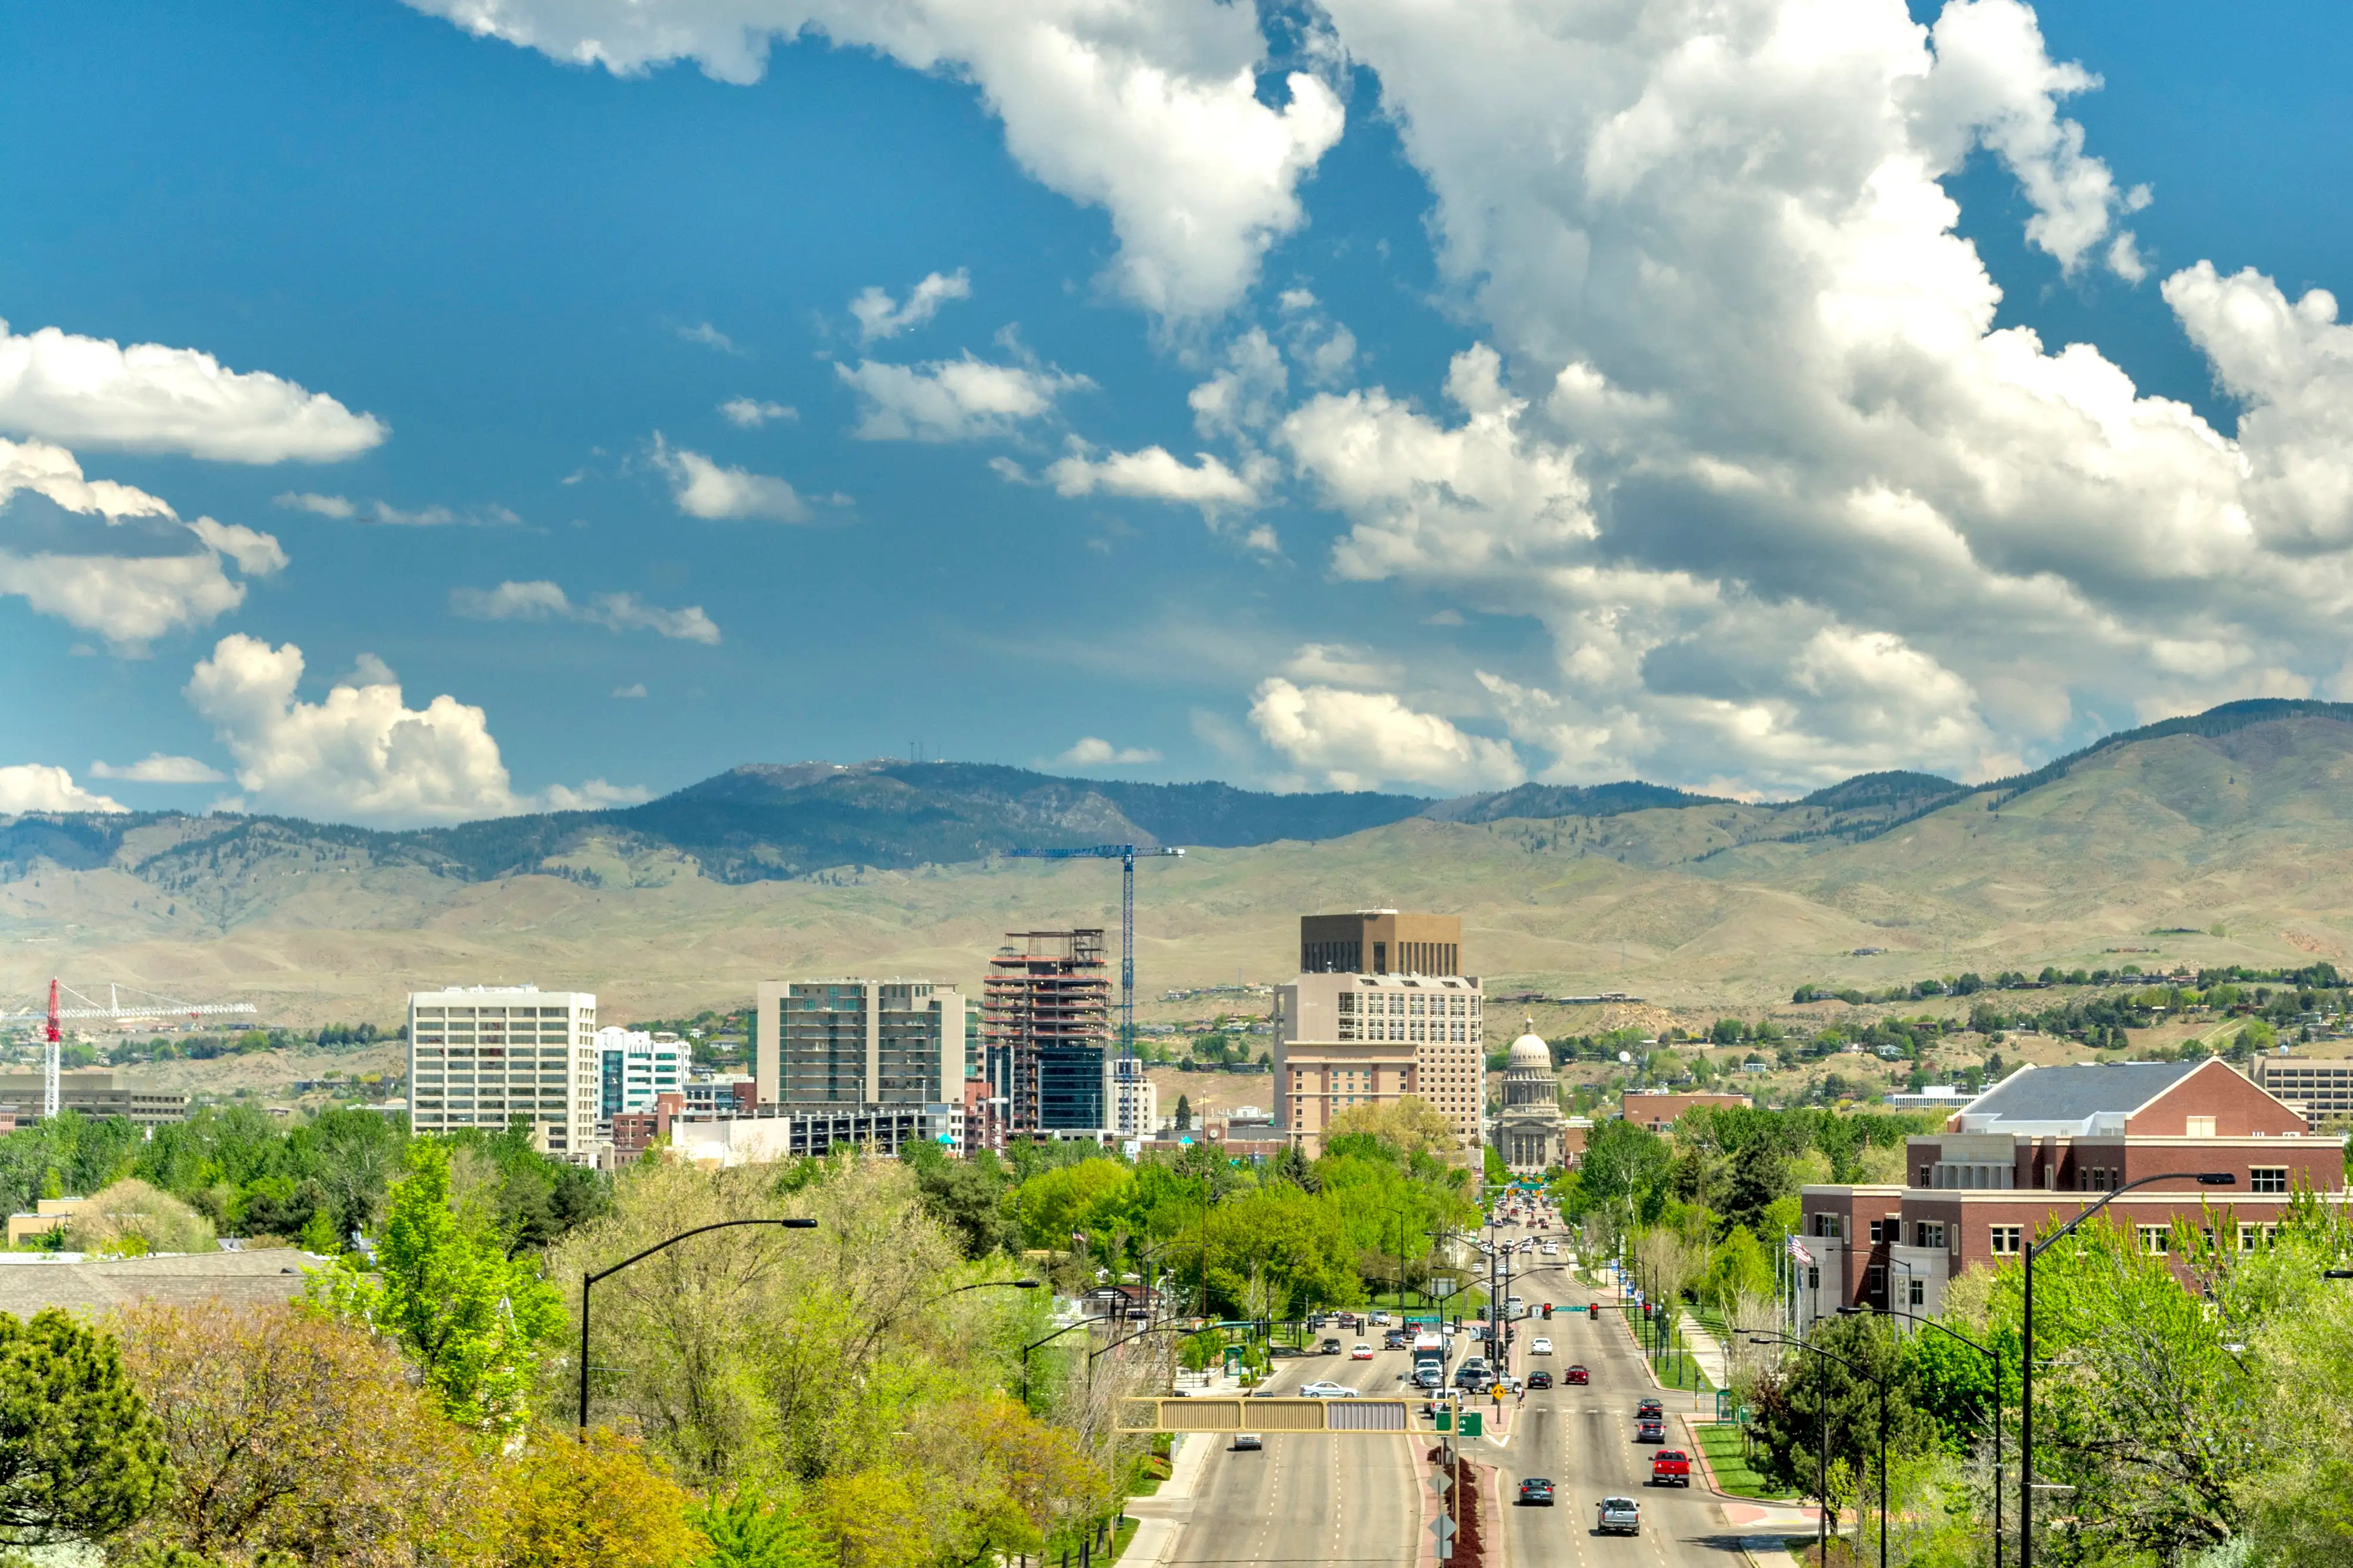 Boise, Idaho. Boise's outdoor splendors stretch as wide as the horizon, but there are plenty of cultural standouts as well, including the  75-year-old Boise Art Museum, the annual Shakespeare festival, and a vibrant Basque community, which dates to the early 1900s.